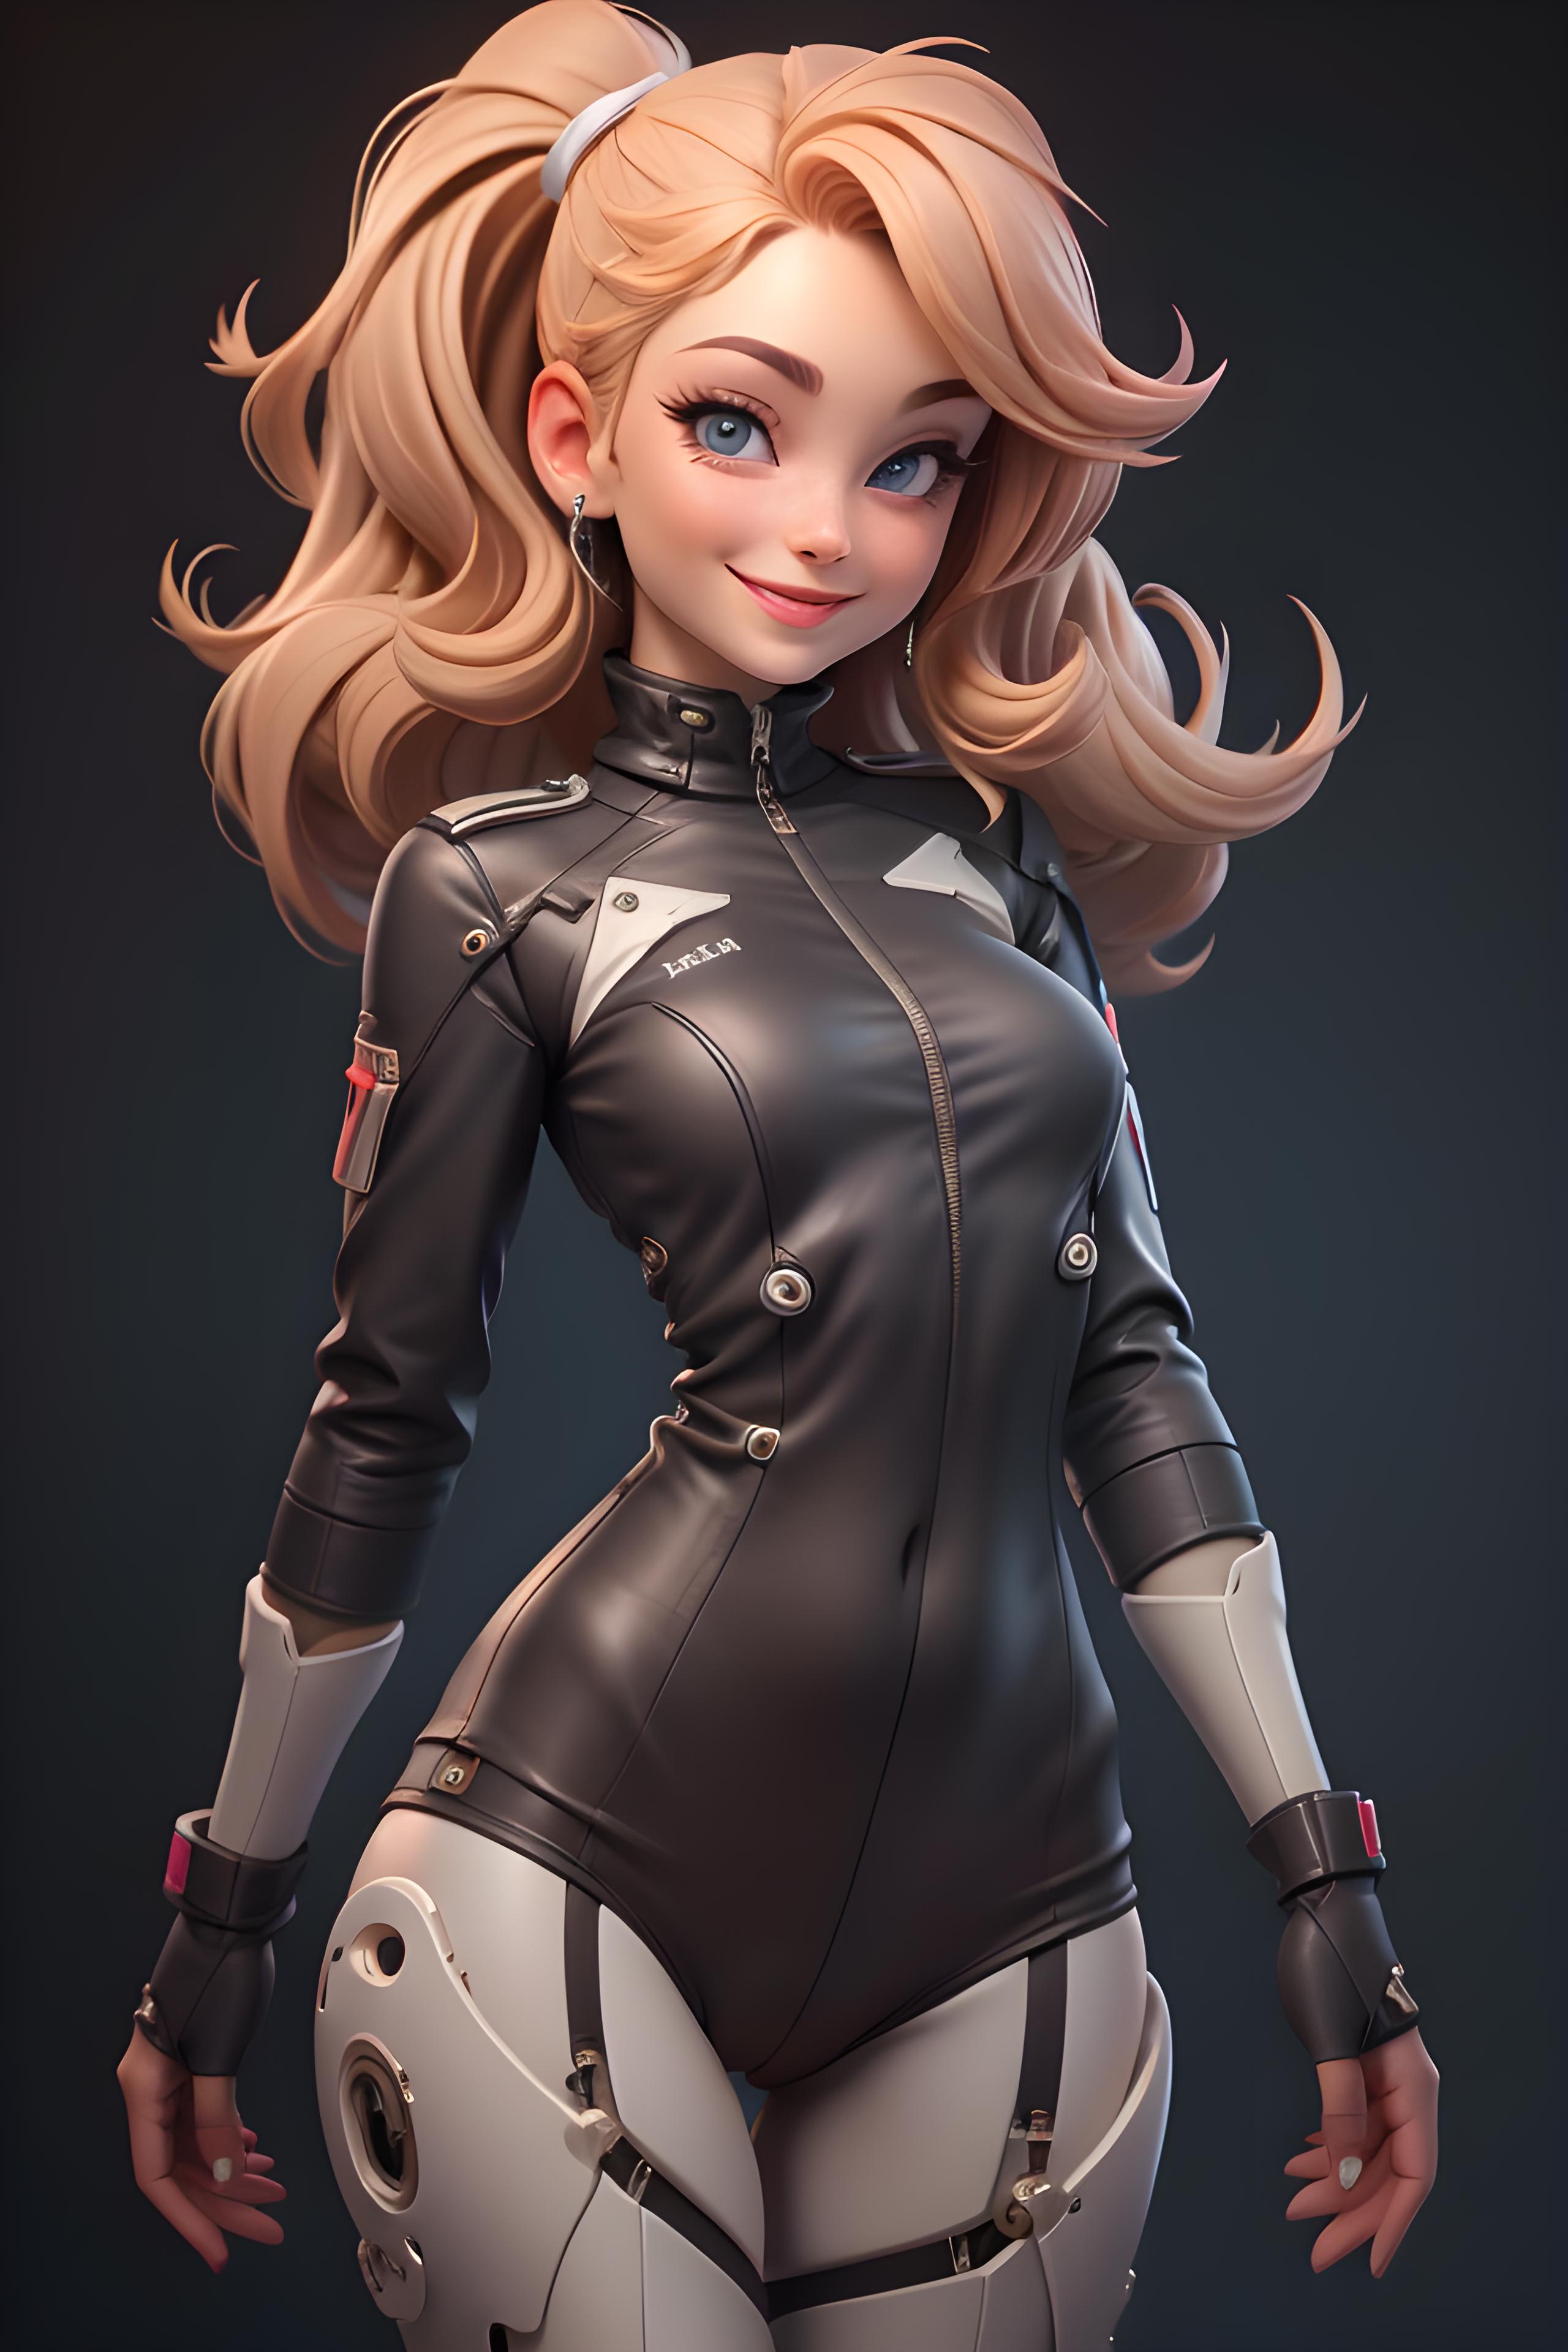 A digital illustration of a woman in a black leather outfit.